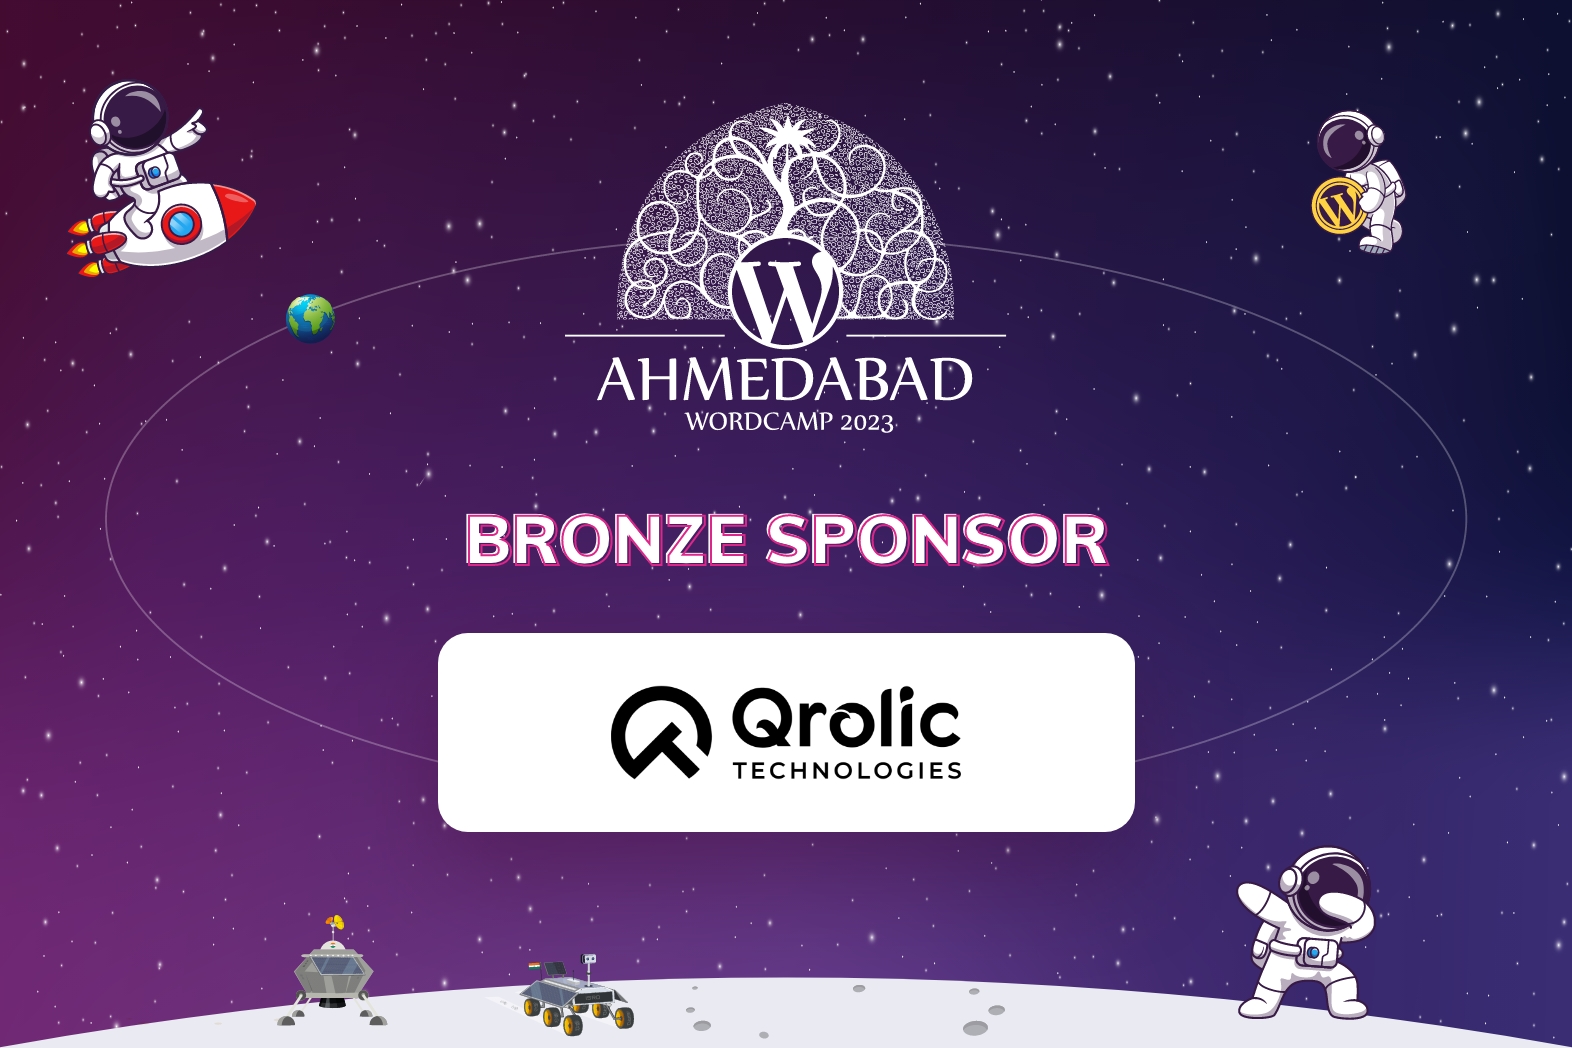 Thank You Qrolic Technologies, for being our Bronze Sponsor